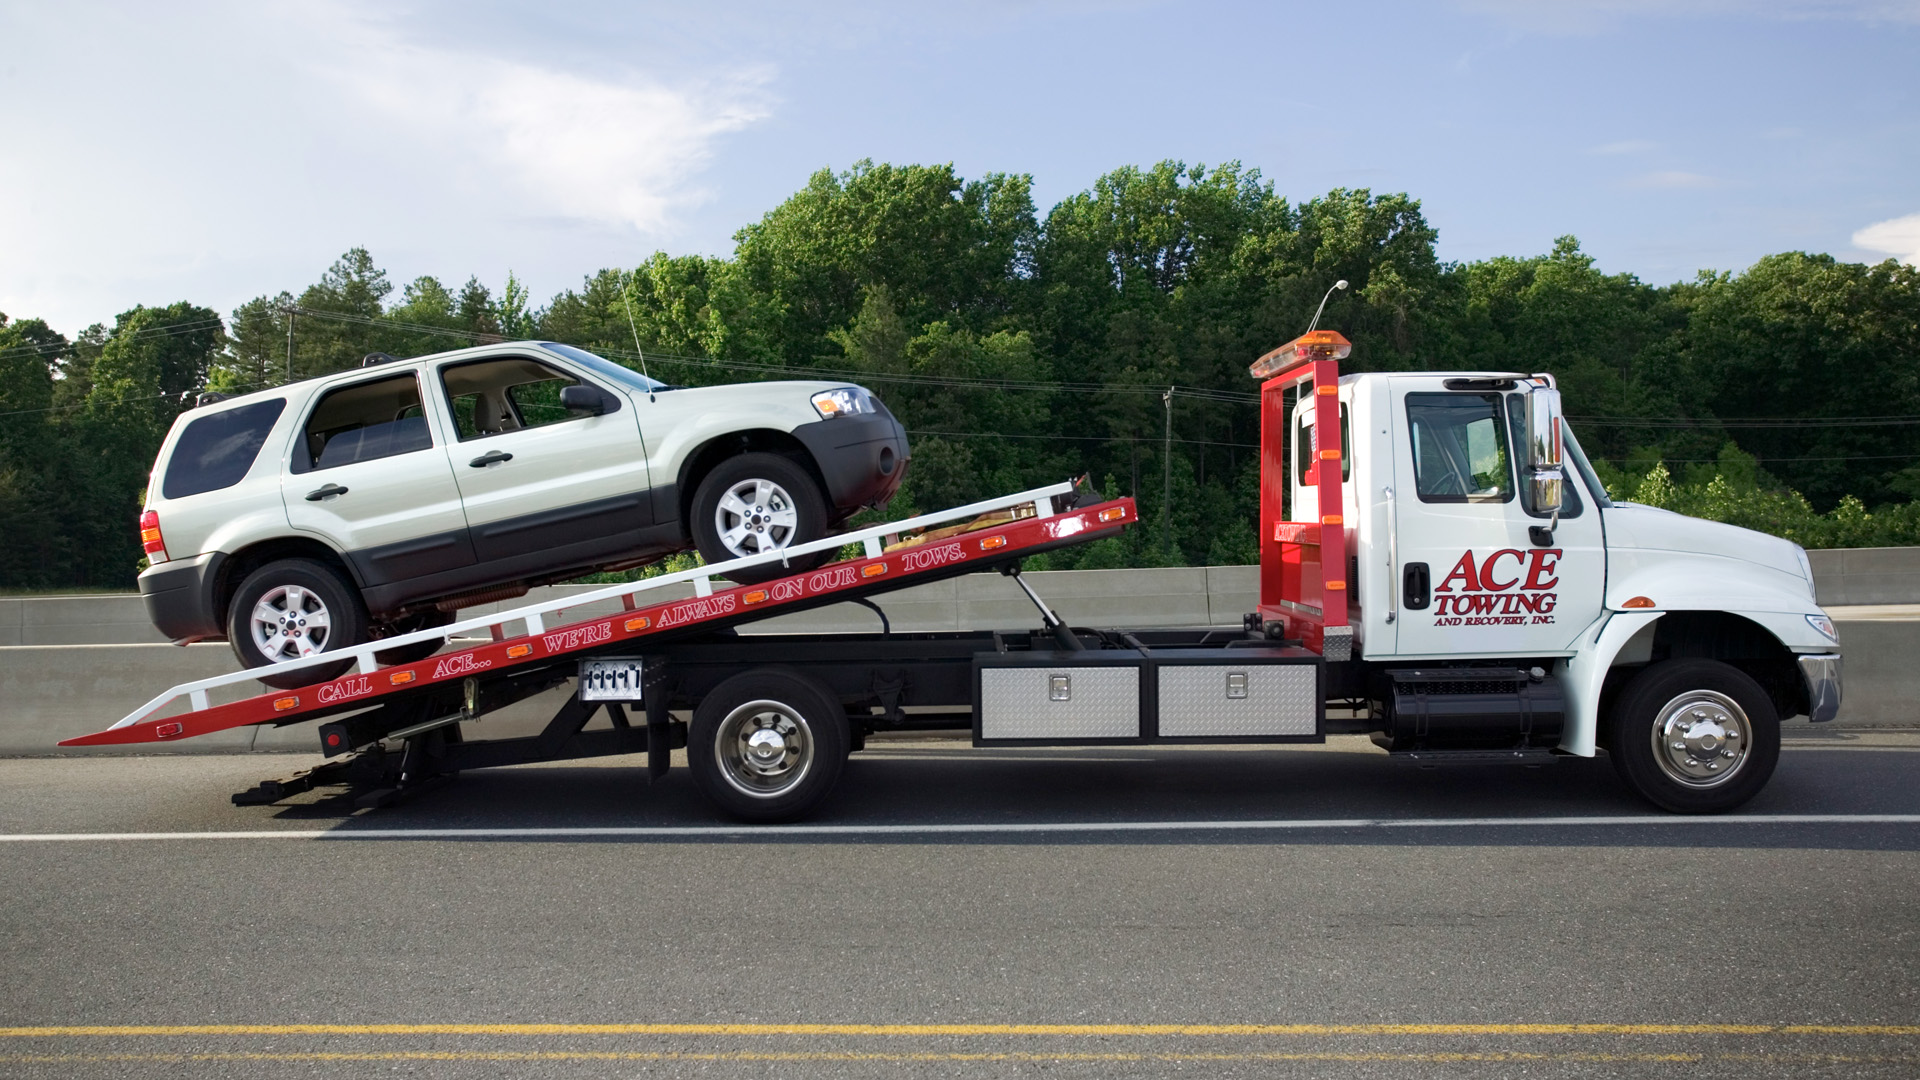 My Car Was Illegally Towed With Permit – Forced to Pay $1k Despite Innocence